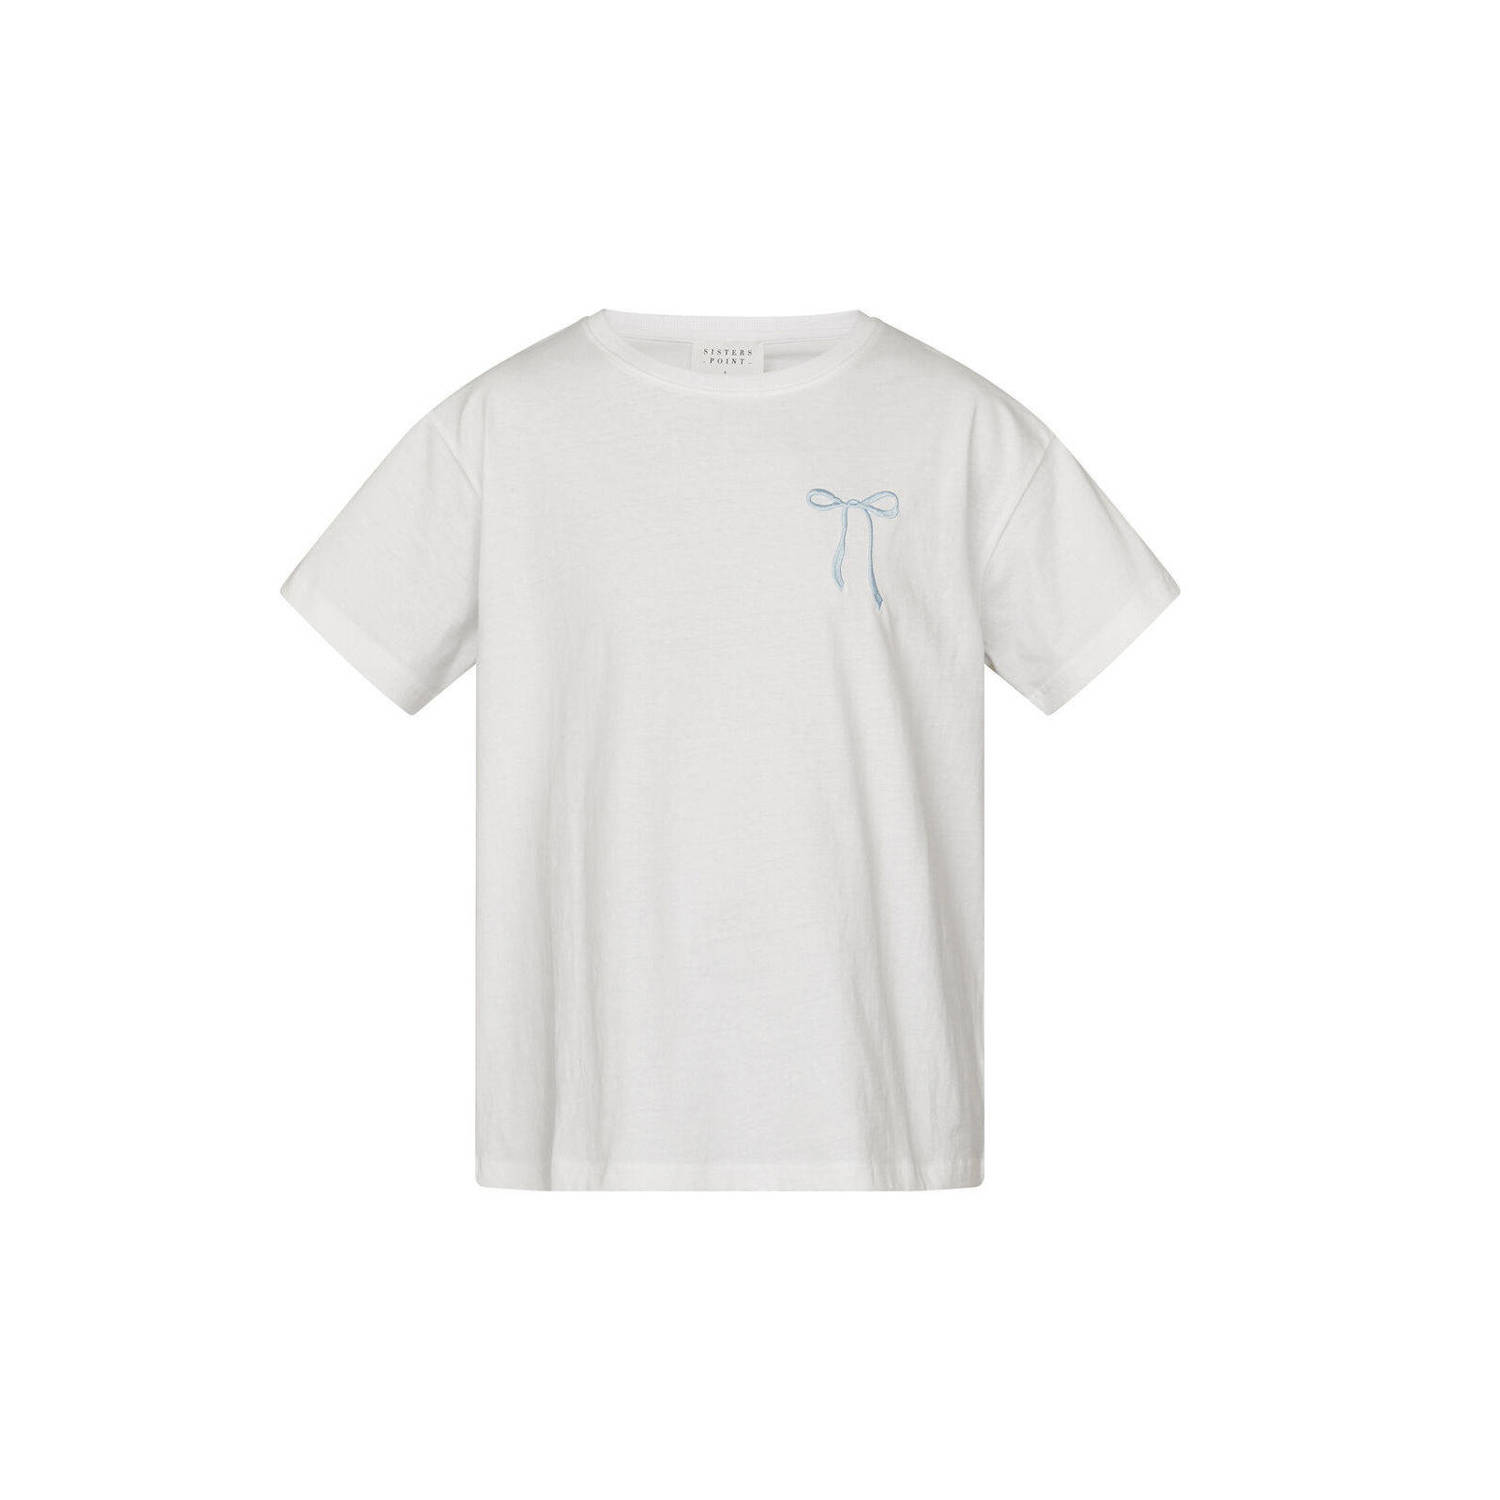 SisterS Point T-shirt wit lichtblauw